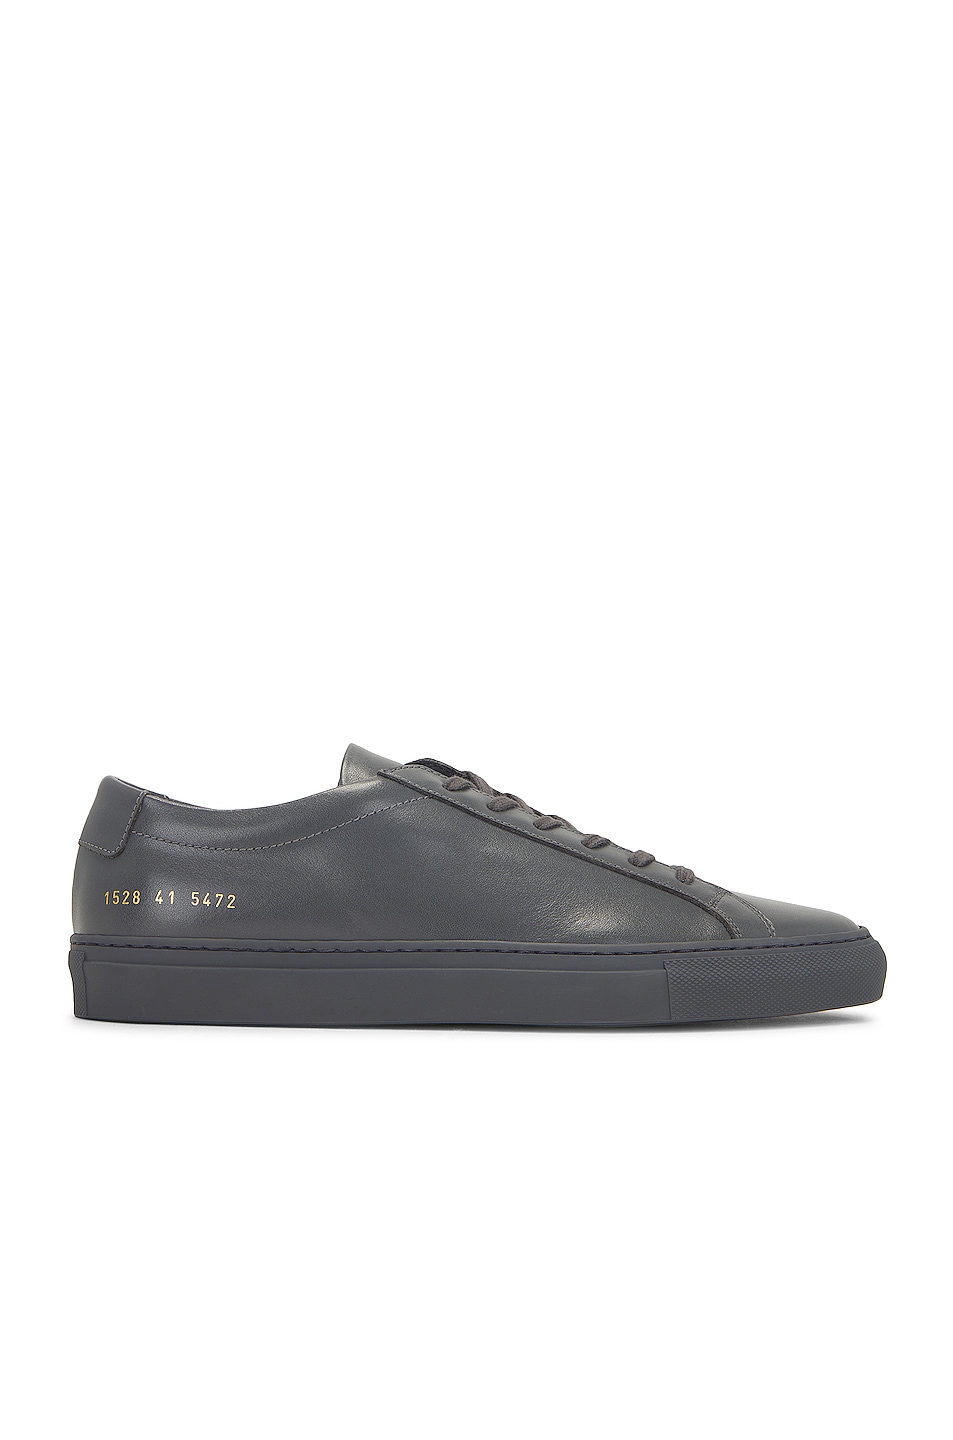 Image 1 of Common Projects Original Achilles Low Article 1528 in Drak Grey